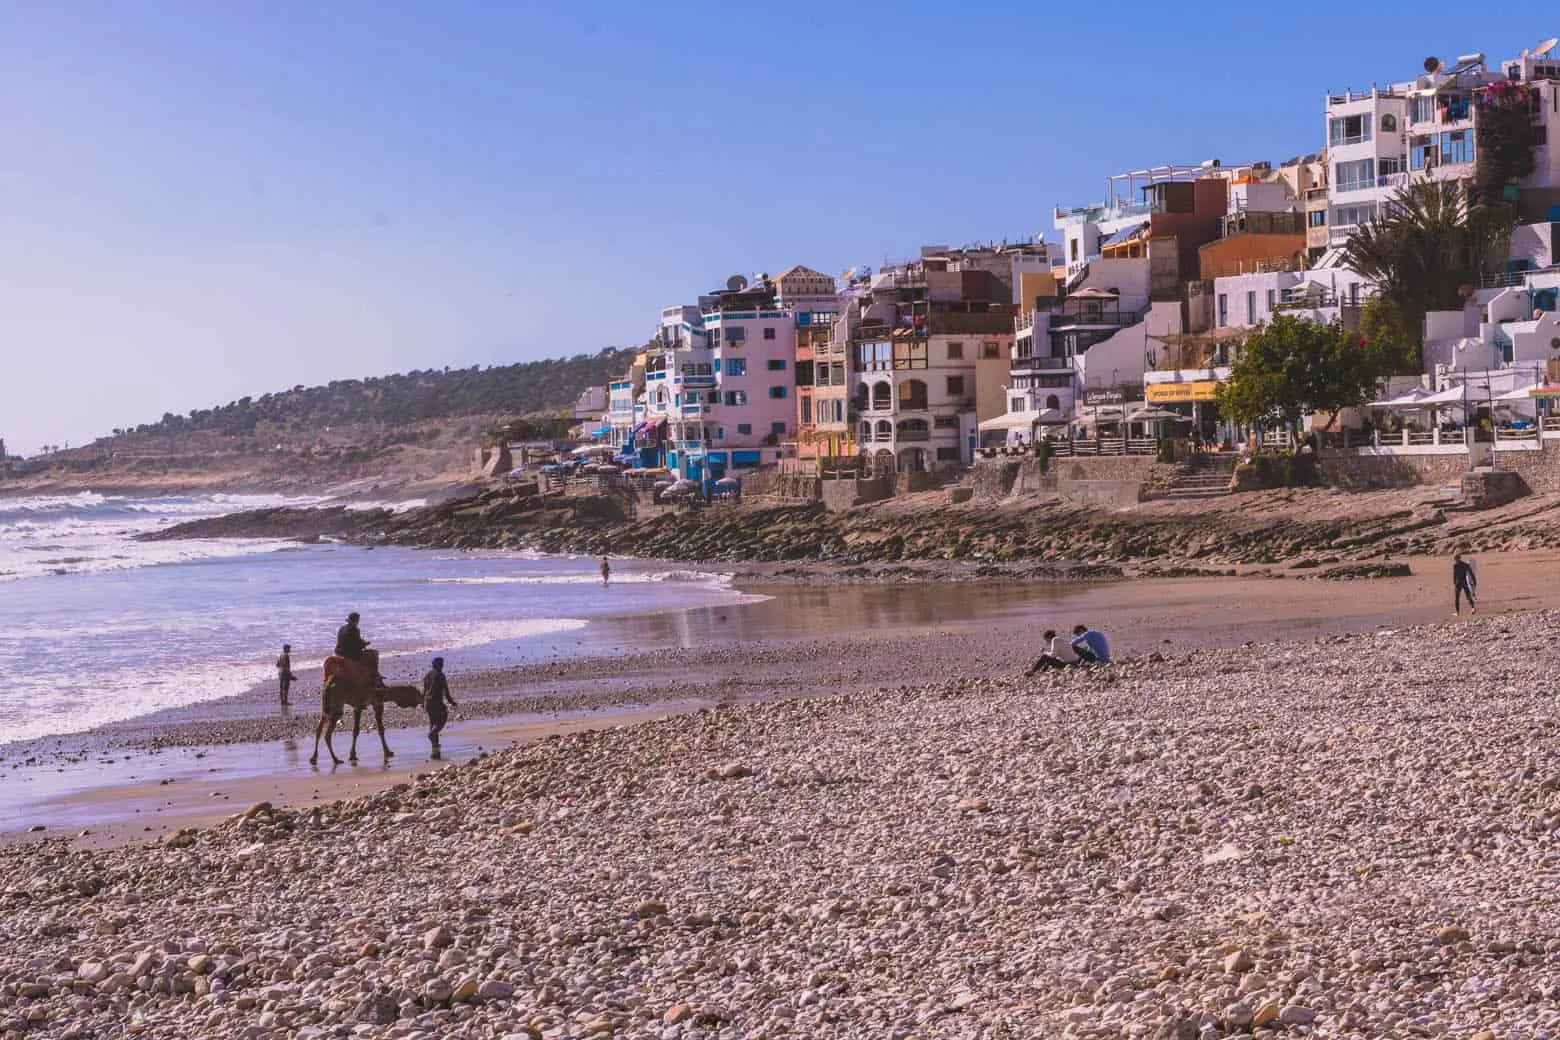 Finding Taghazout, Morocco's surf camps.